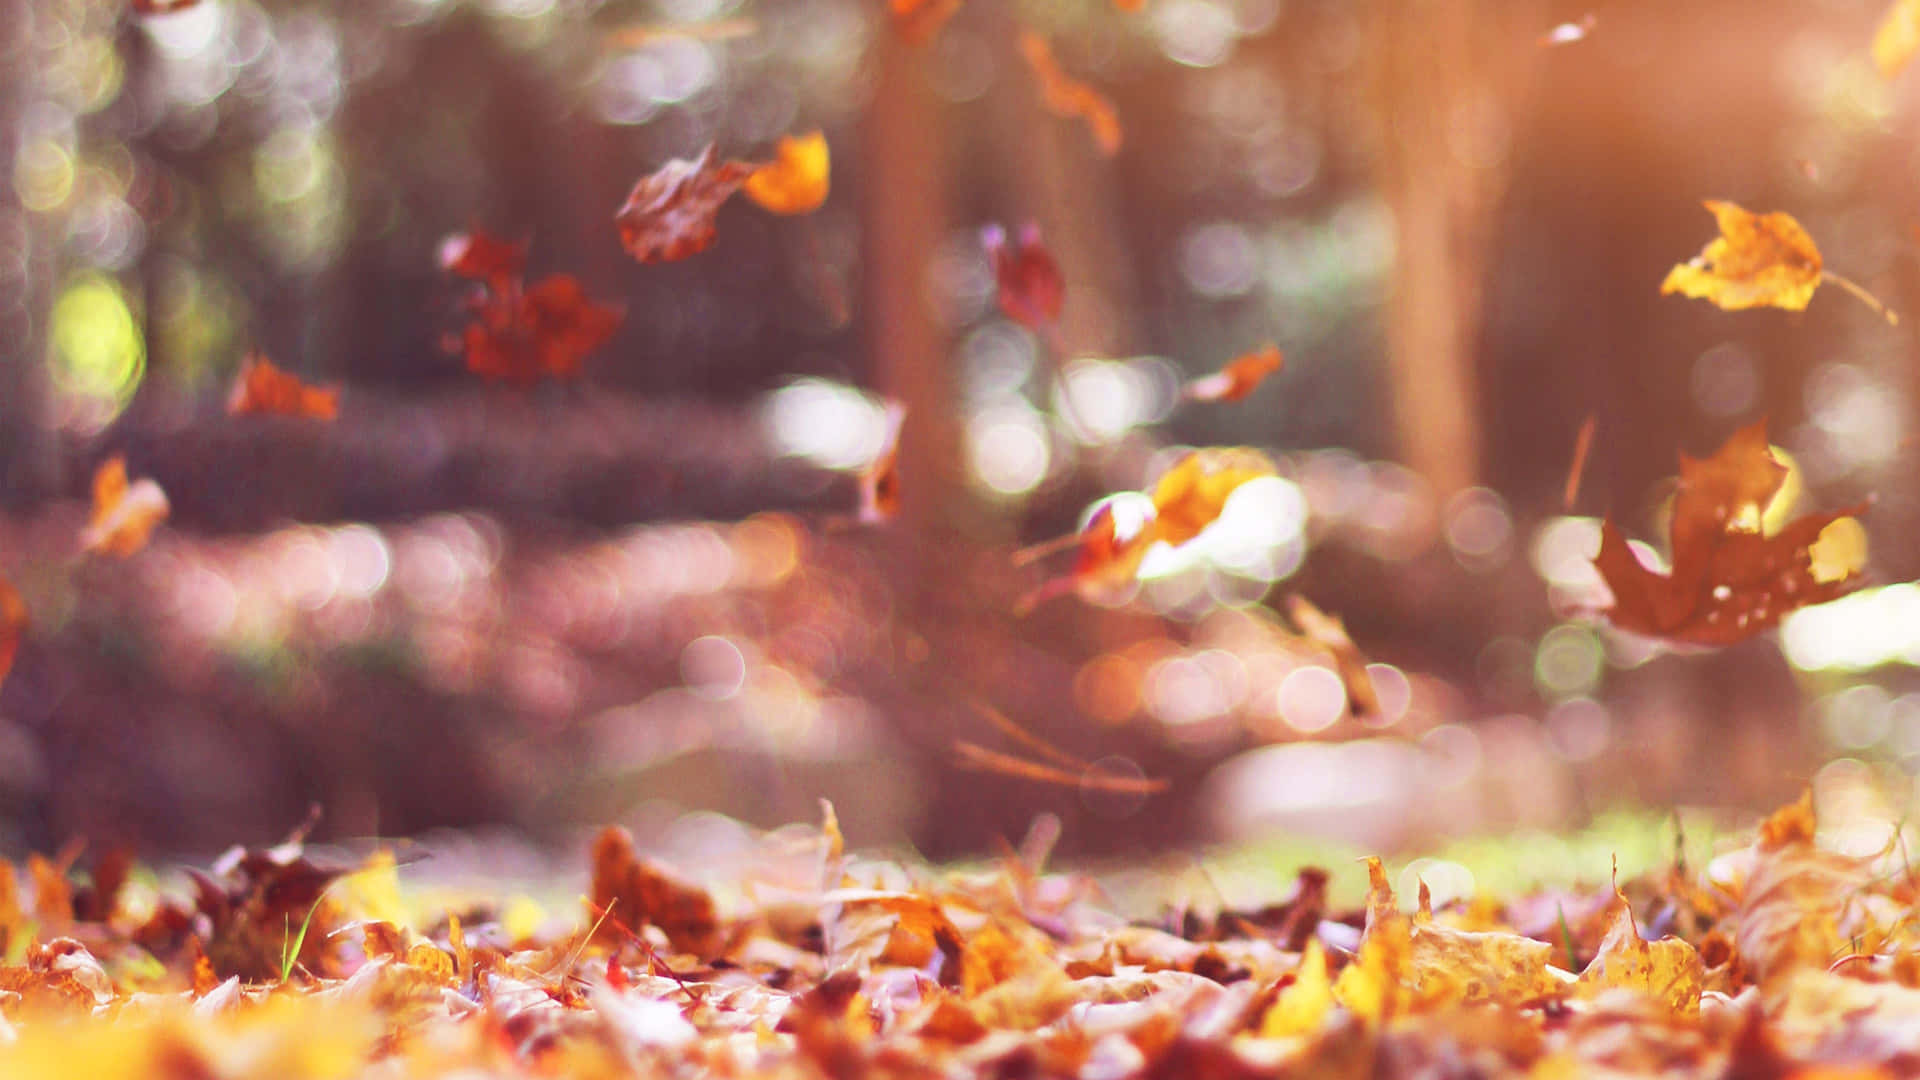 Enjoy the season and the warm colors of autumn leaves.